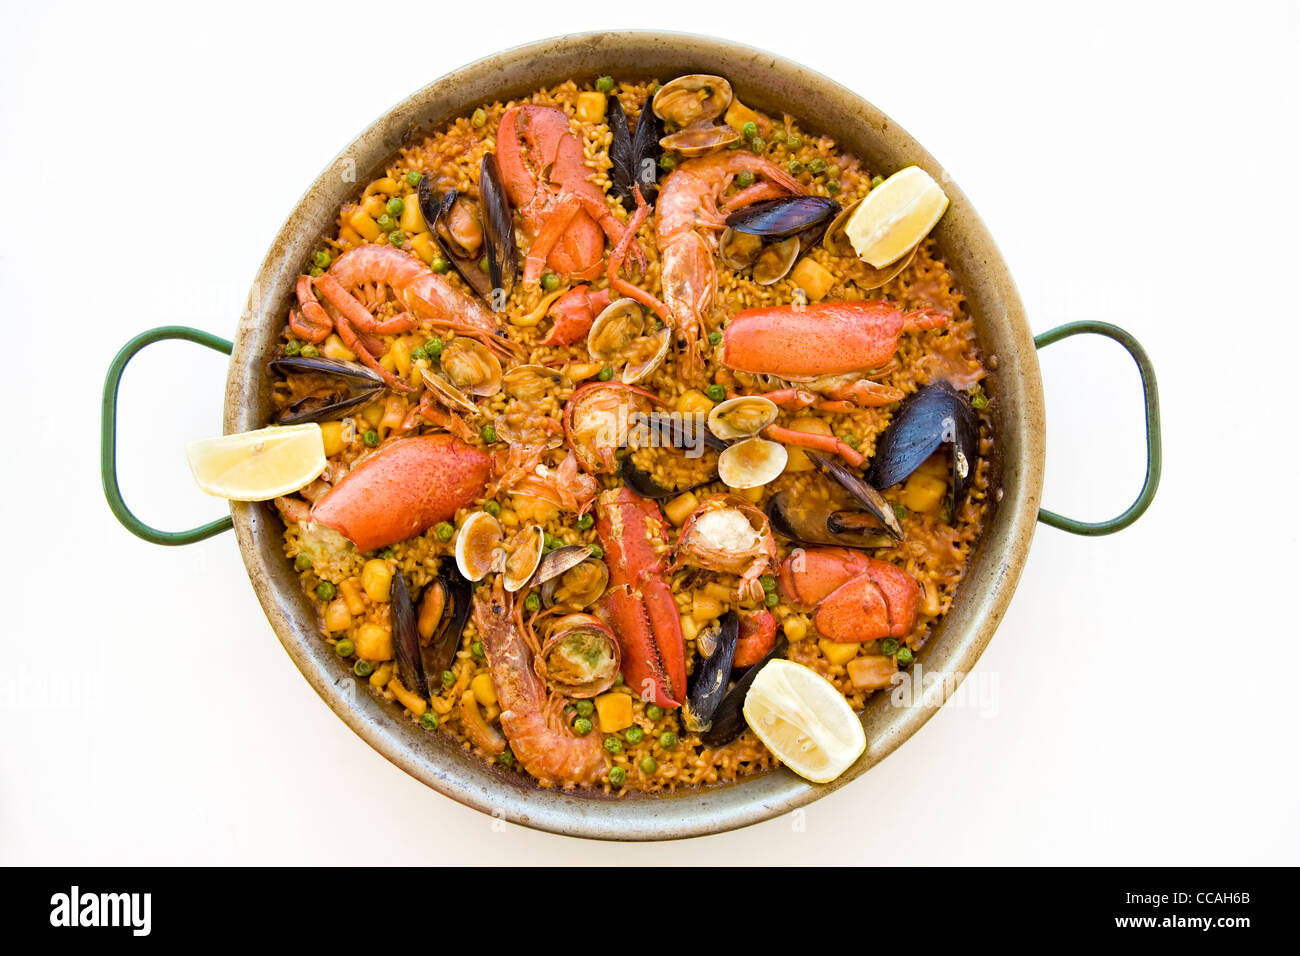 Isolated Spanish paella served on a dish Stock Photo